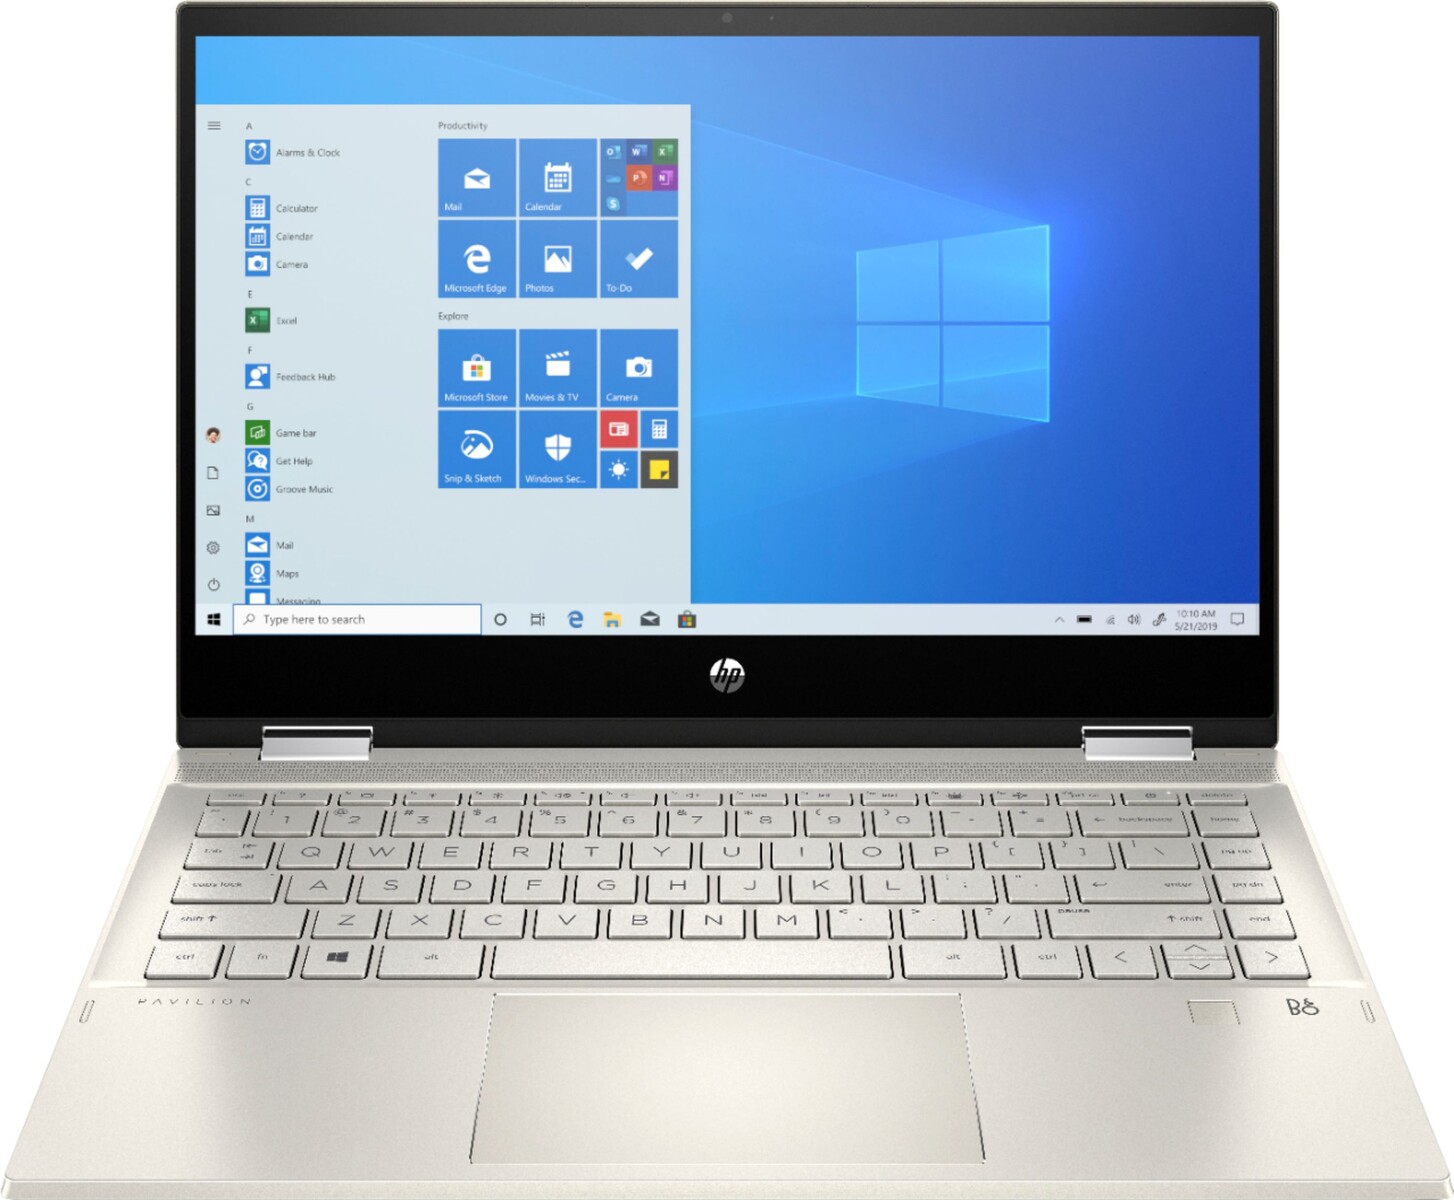 Latest HP Pavilion x360 14 with 10th gen Core i5 CPU, 1080p touchscreen, 8 GB RAM, and 256 GB